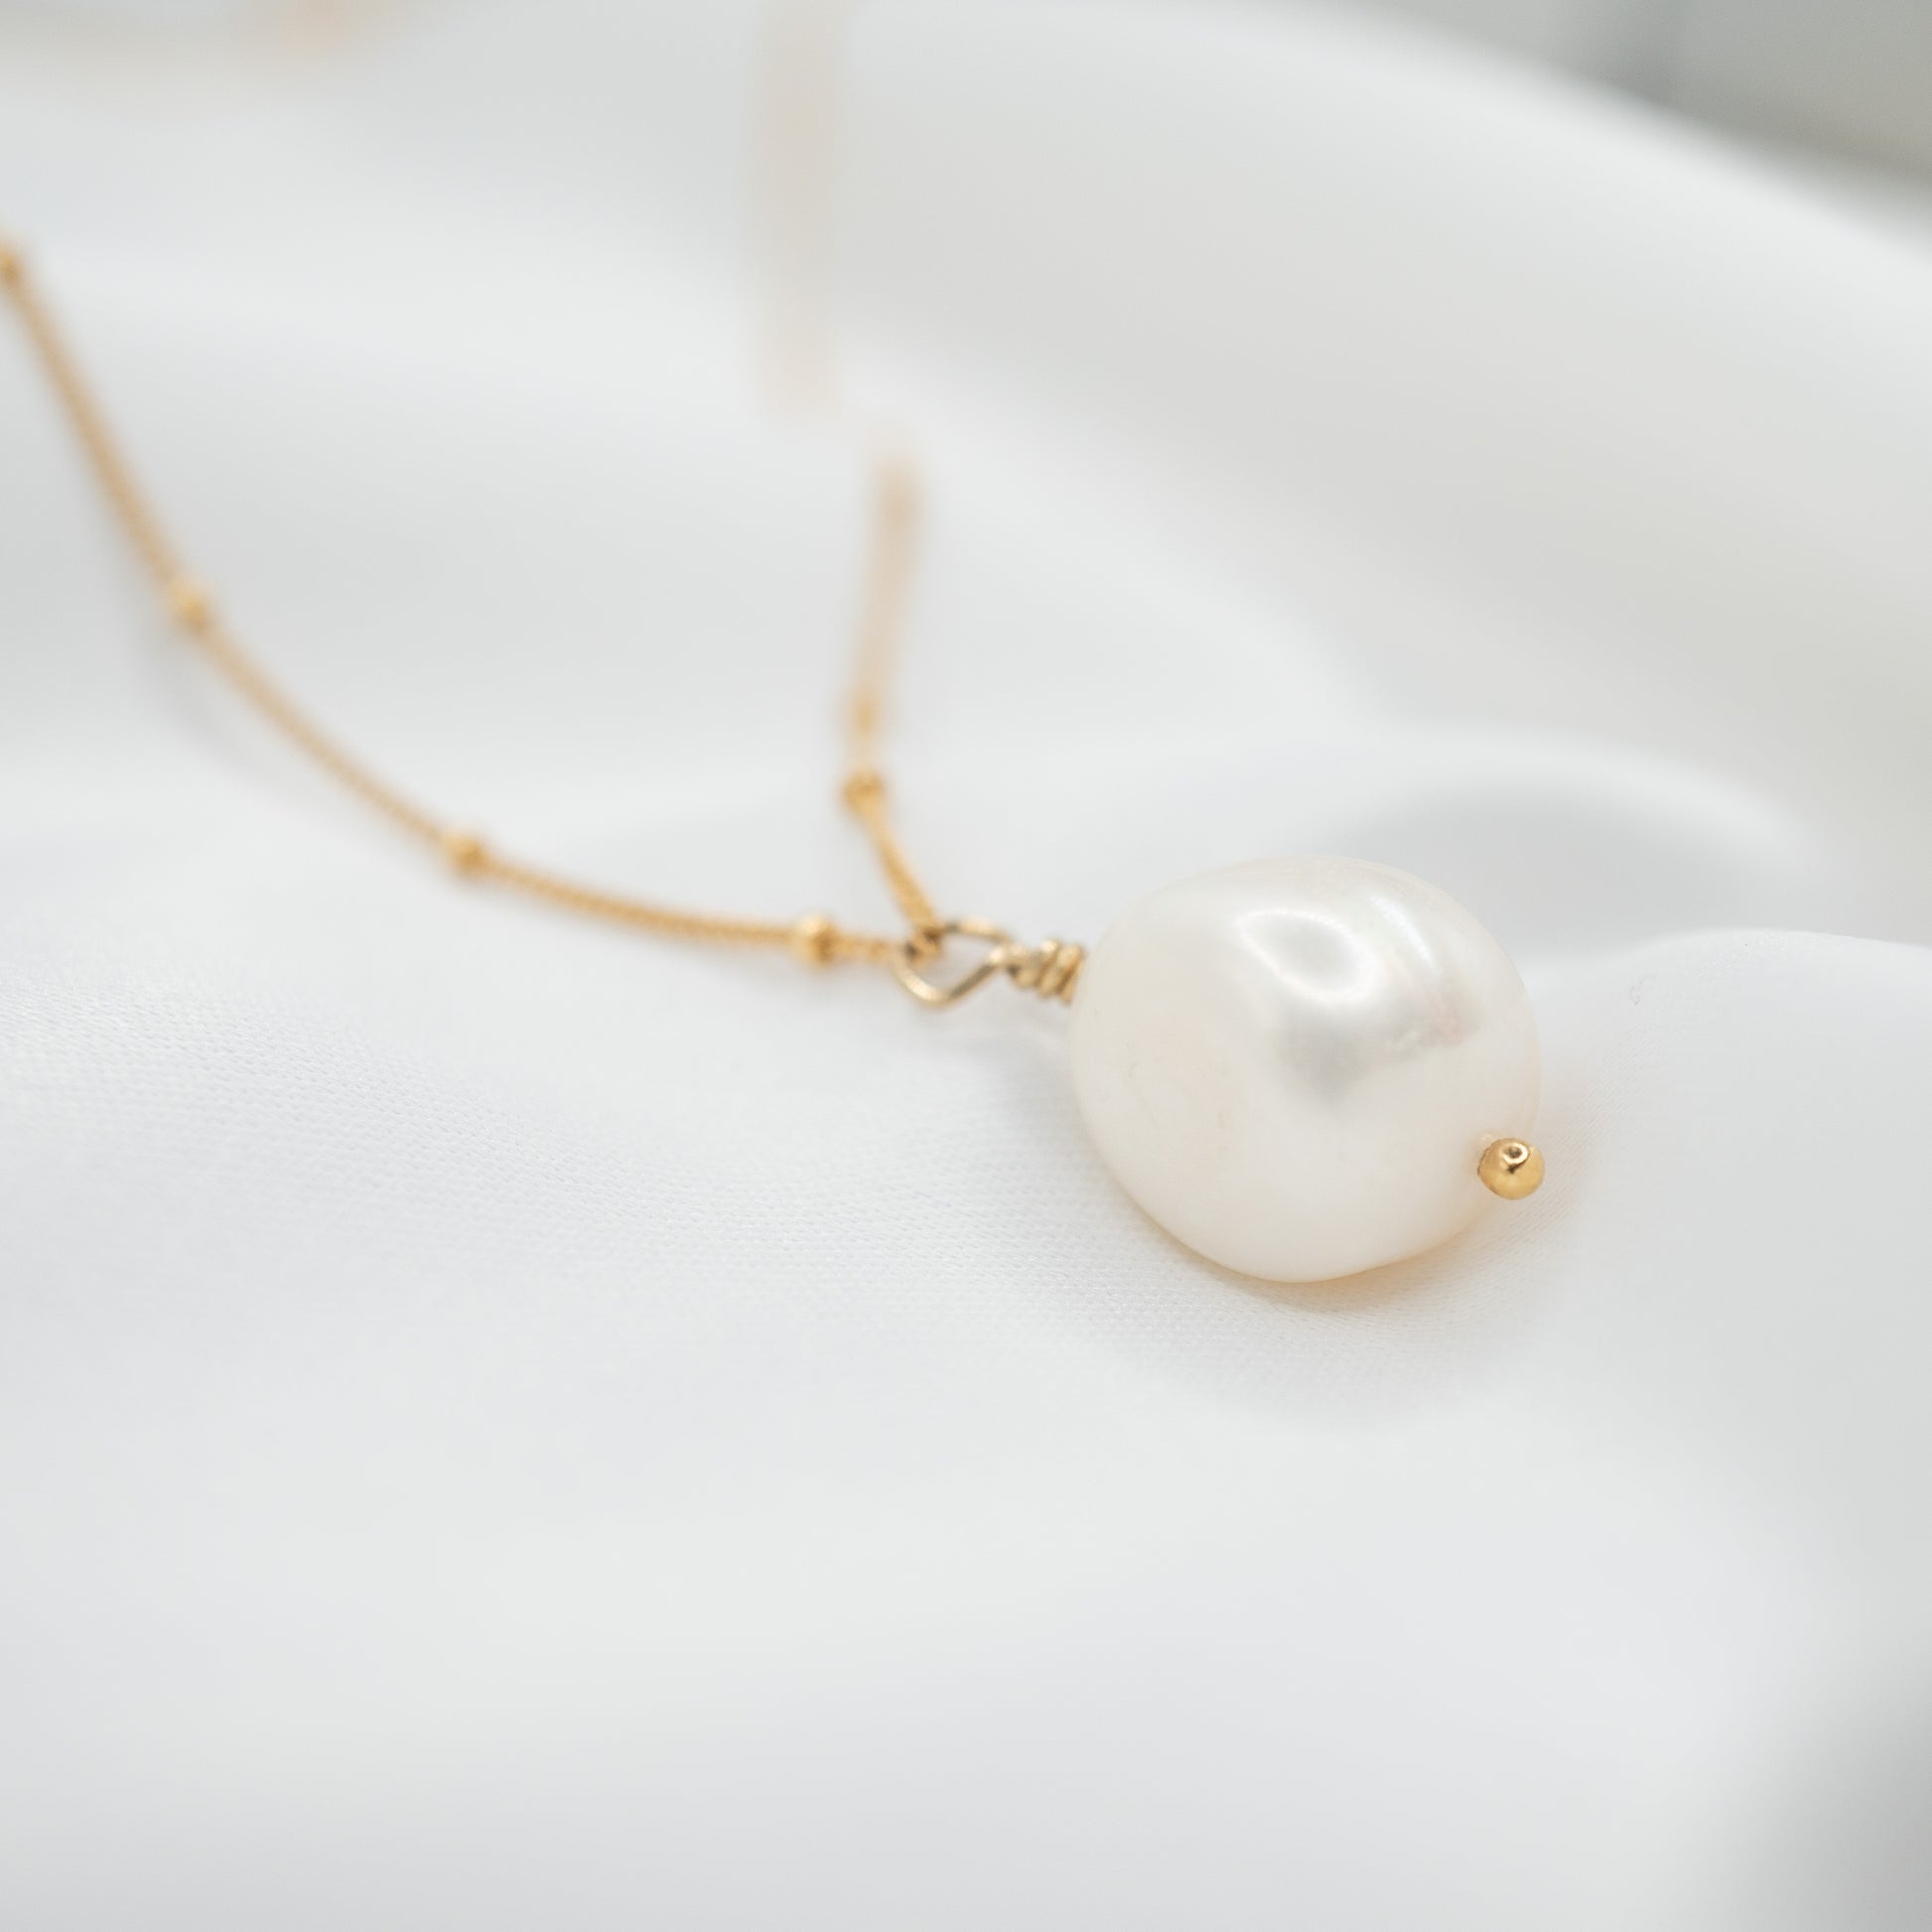 Gold Filled Baroque Pearl Pendant and Satellite Necklace - shot on white - close up